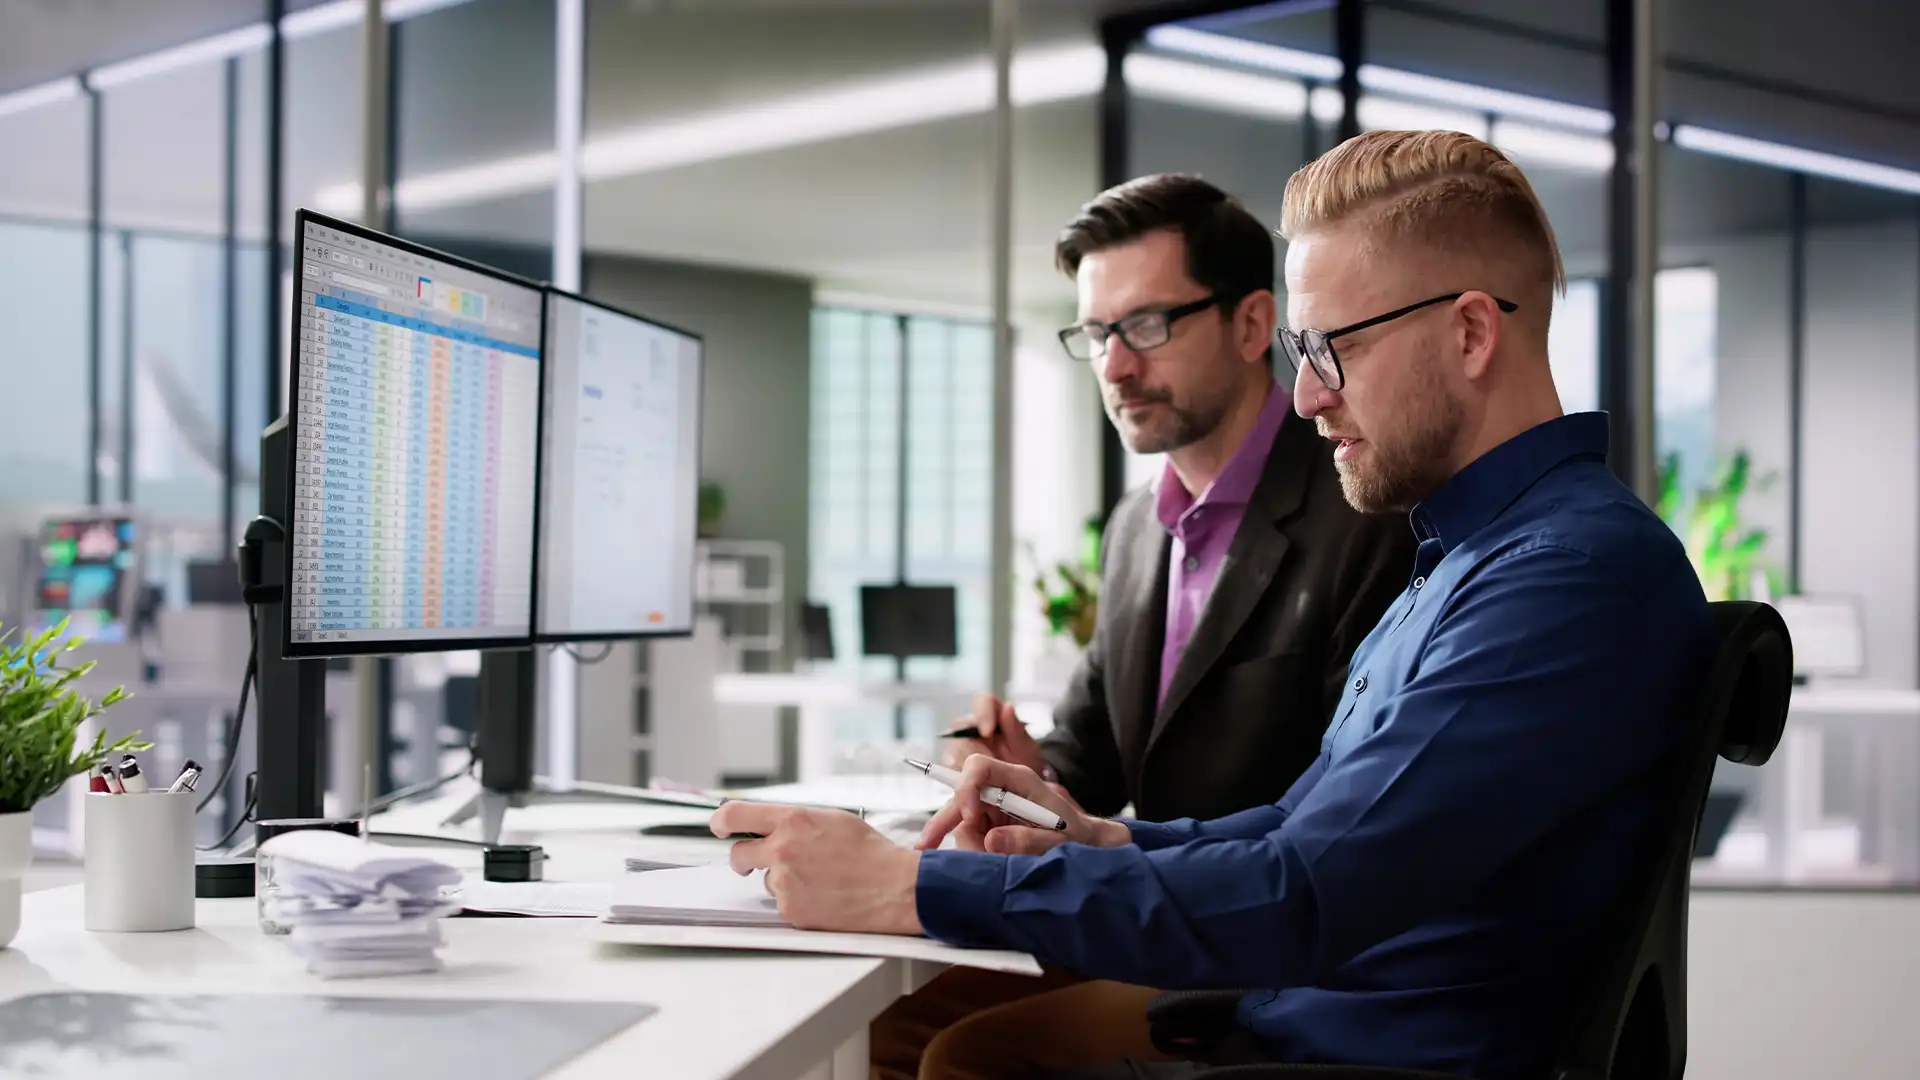 Two corporate experts analyze invoice data on multiple screens, illustrating Prudent's meticulous approach to technology invoice management and cost efficiency